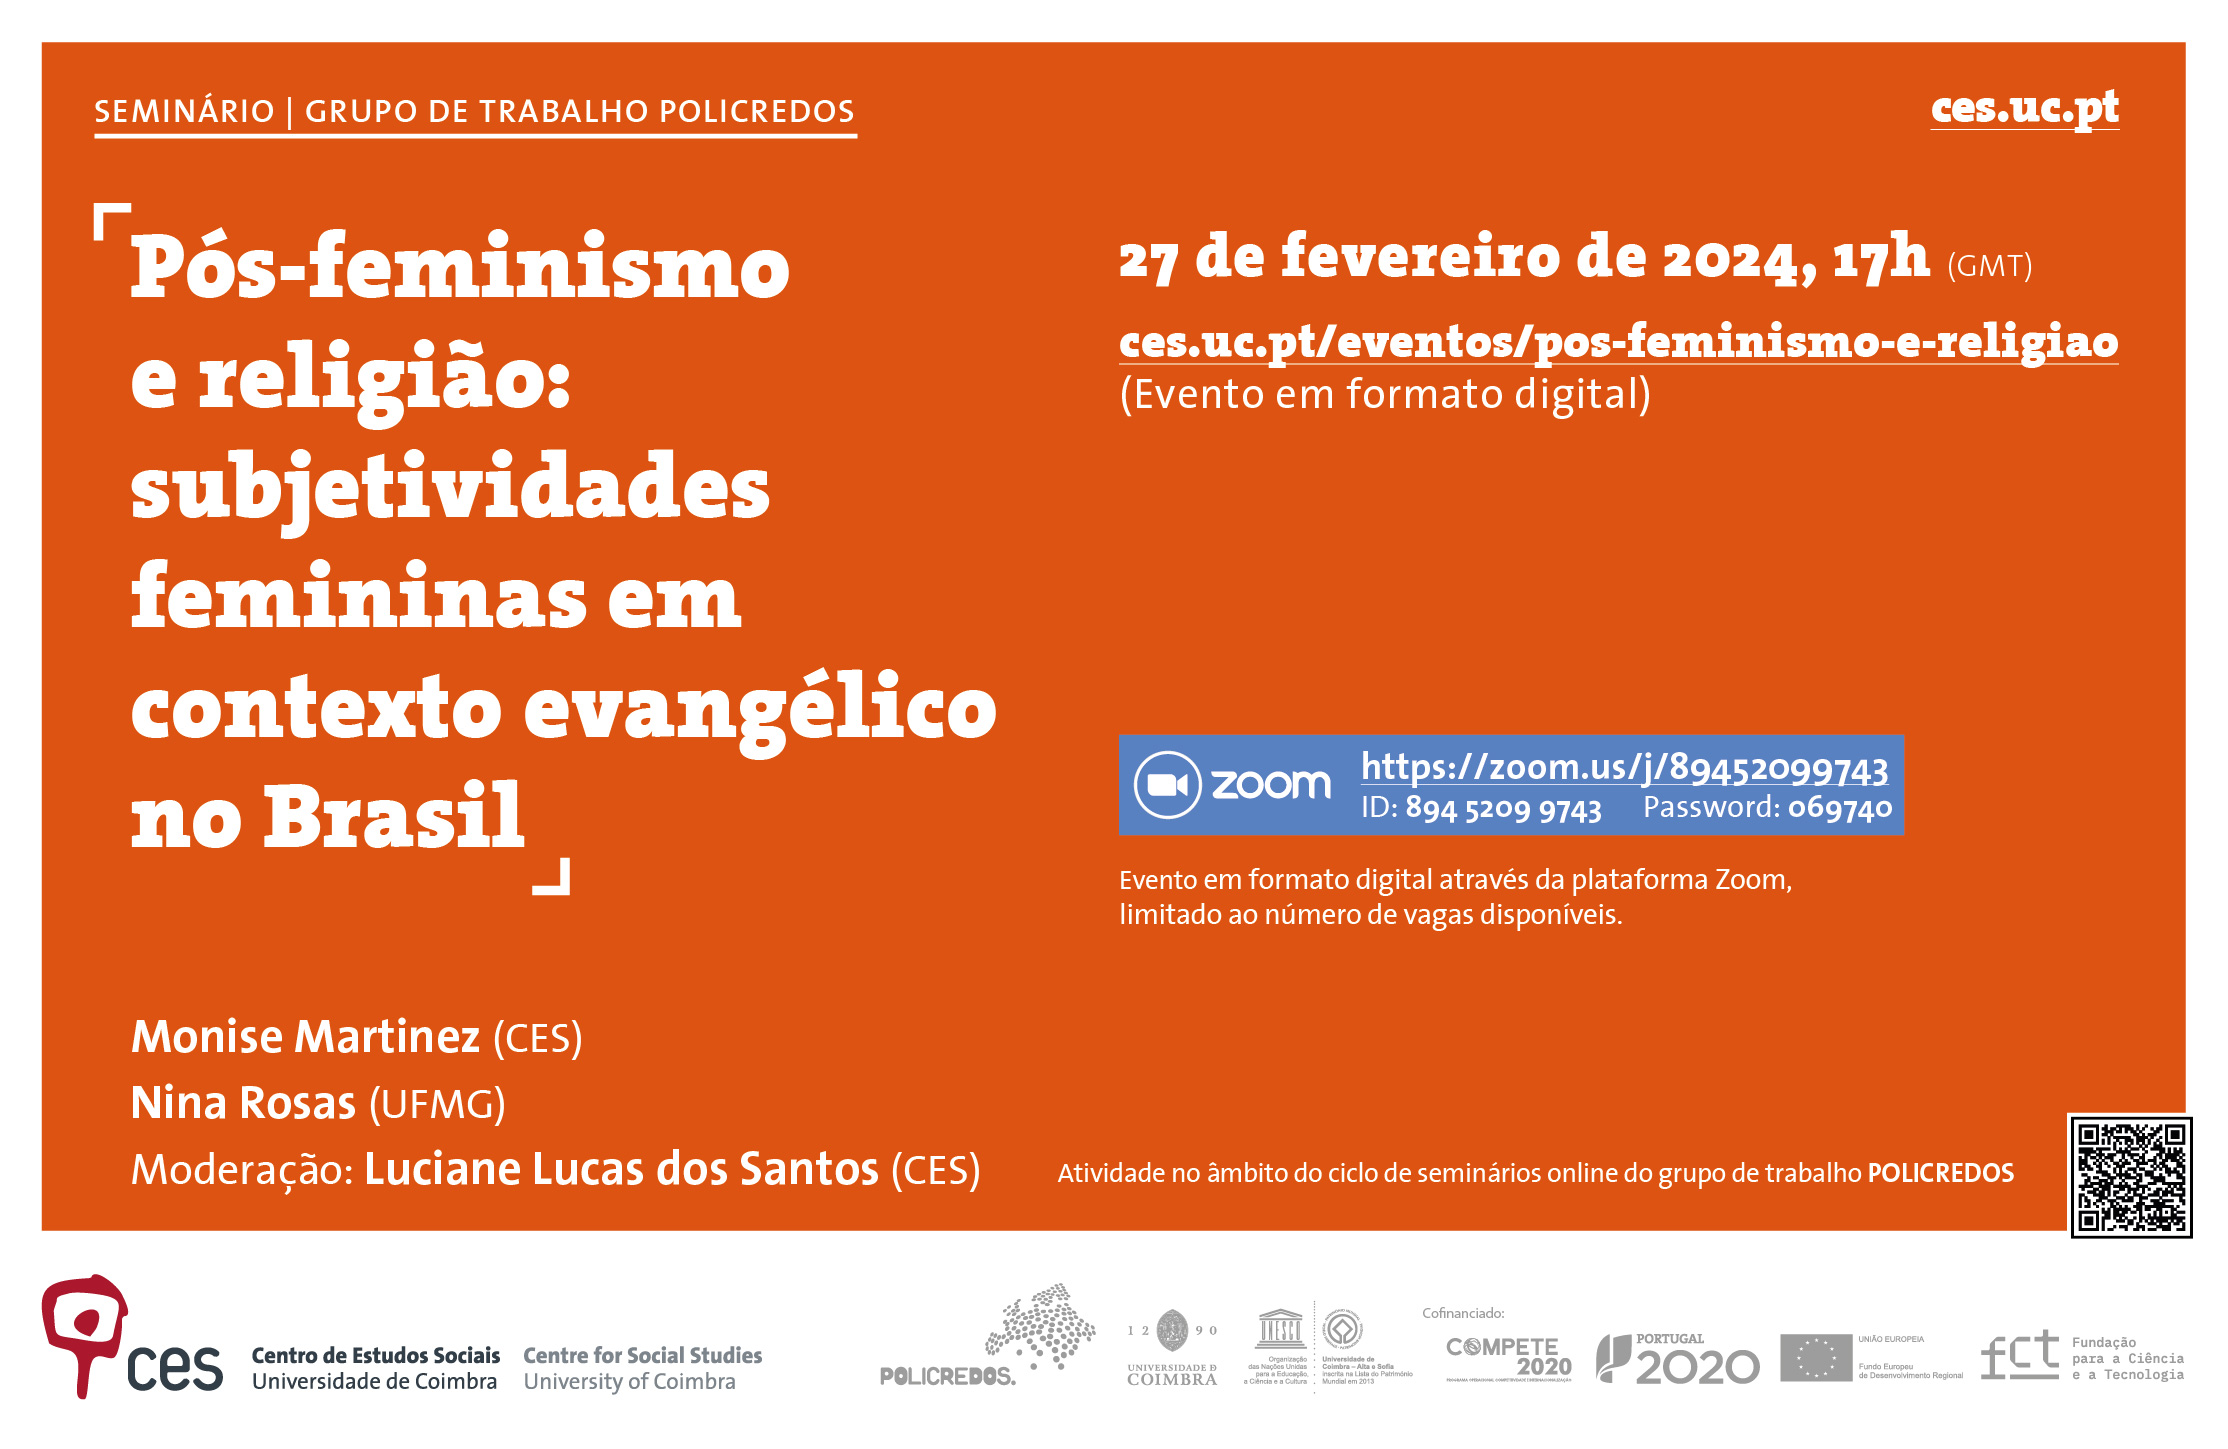 Post-feminism and religion: female subjectivities in evangelical context in Brazil<span id="edit_45032"><script>$(function() { $('#edit_45032').load( "/myces/user/editobj.php?tipo=evento&id=45032" ); });</script></span>